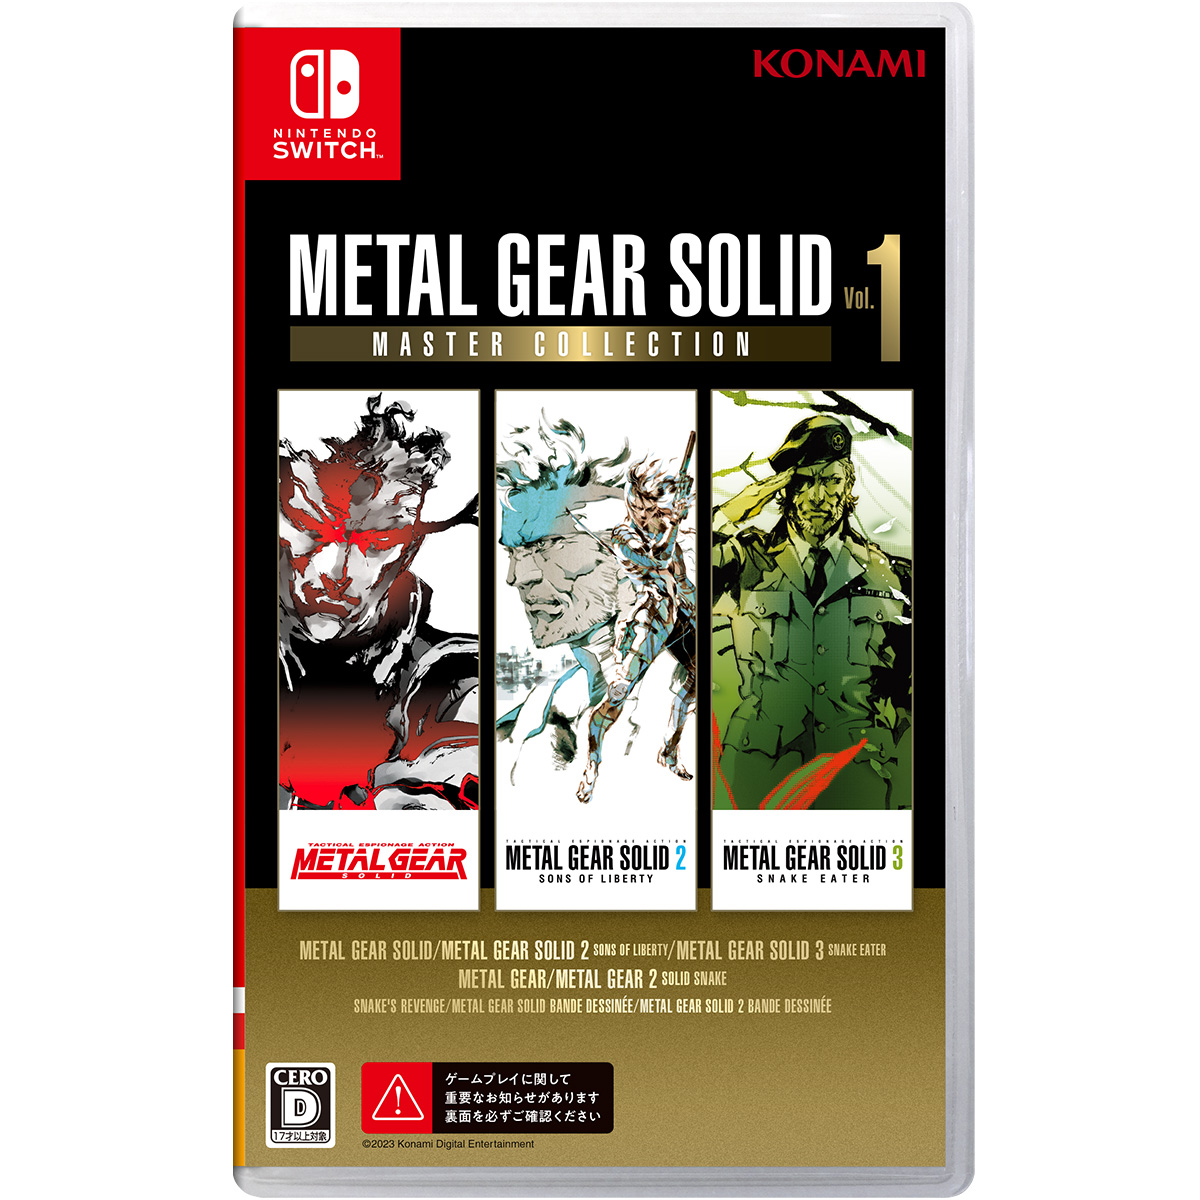 ［Switch］METAL GEAR SOLID: MASTER COLLECTION Vol.1　メタルギアソリッド